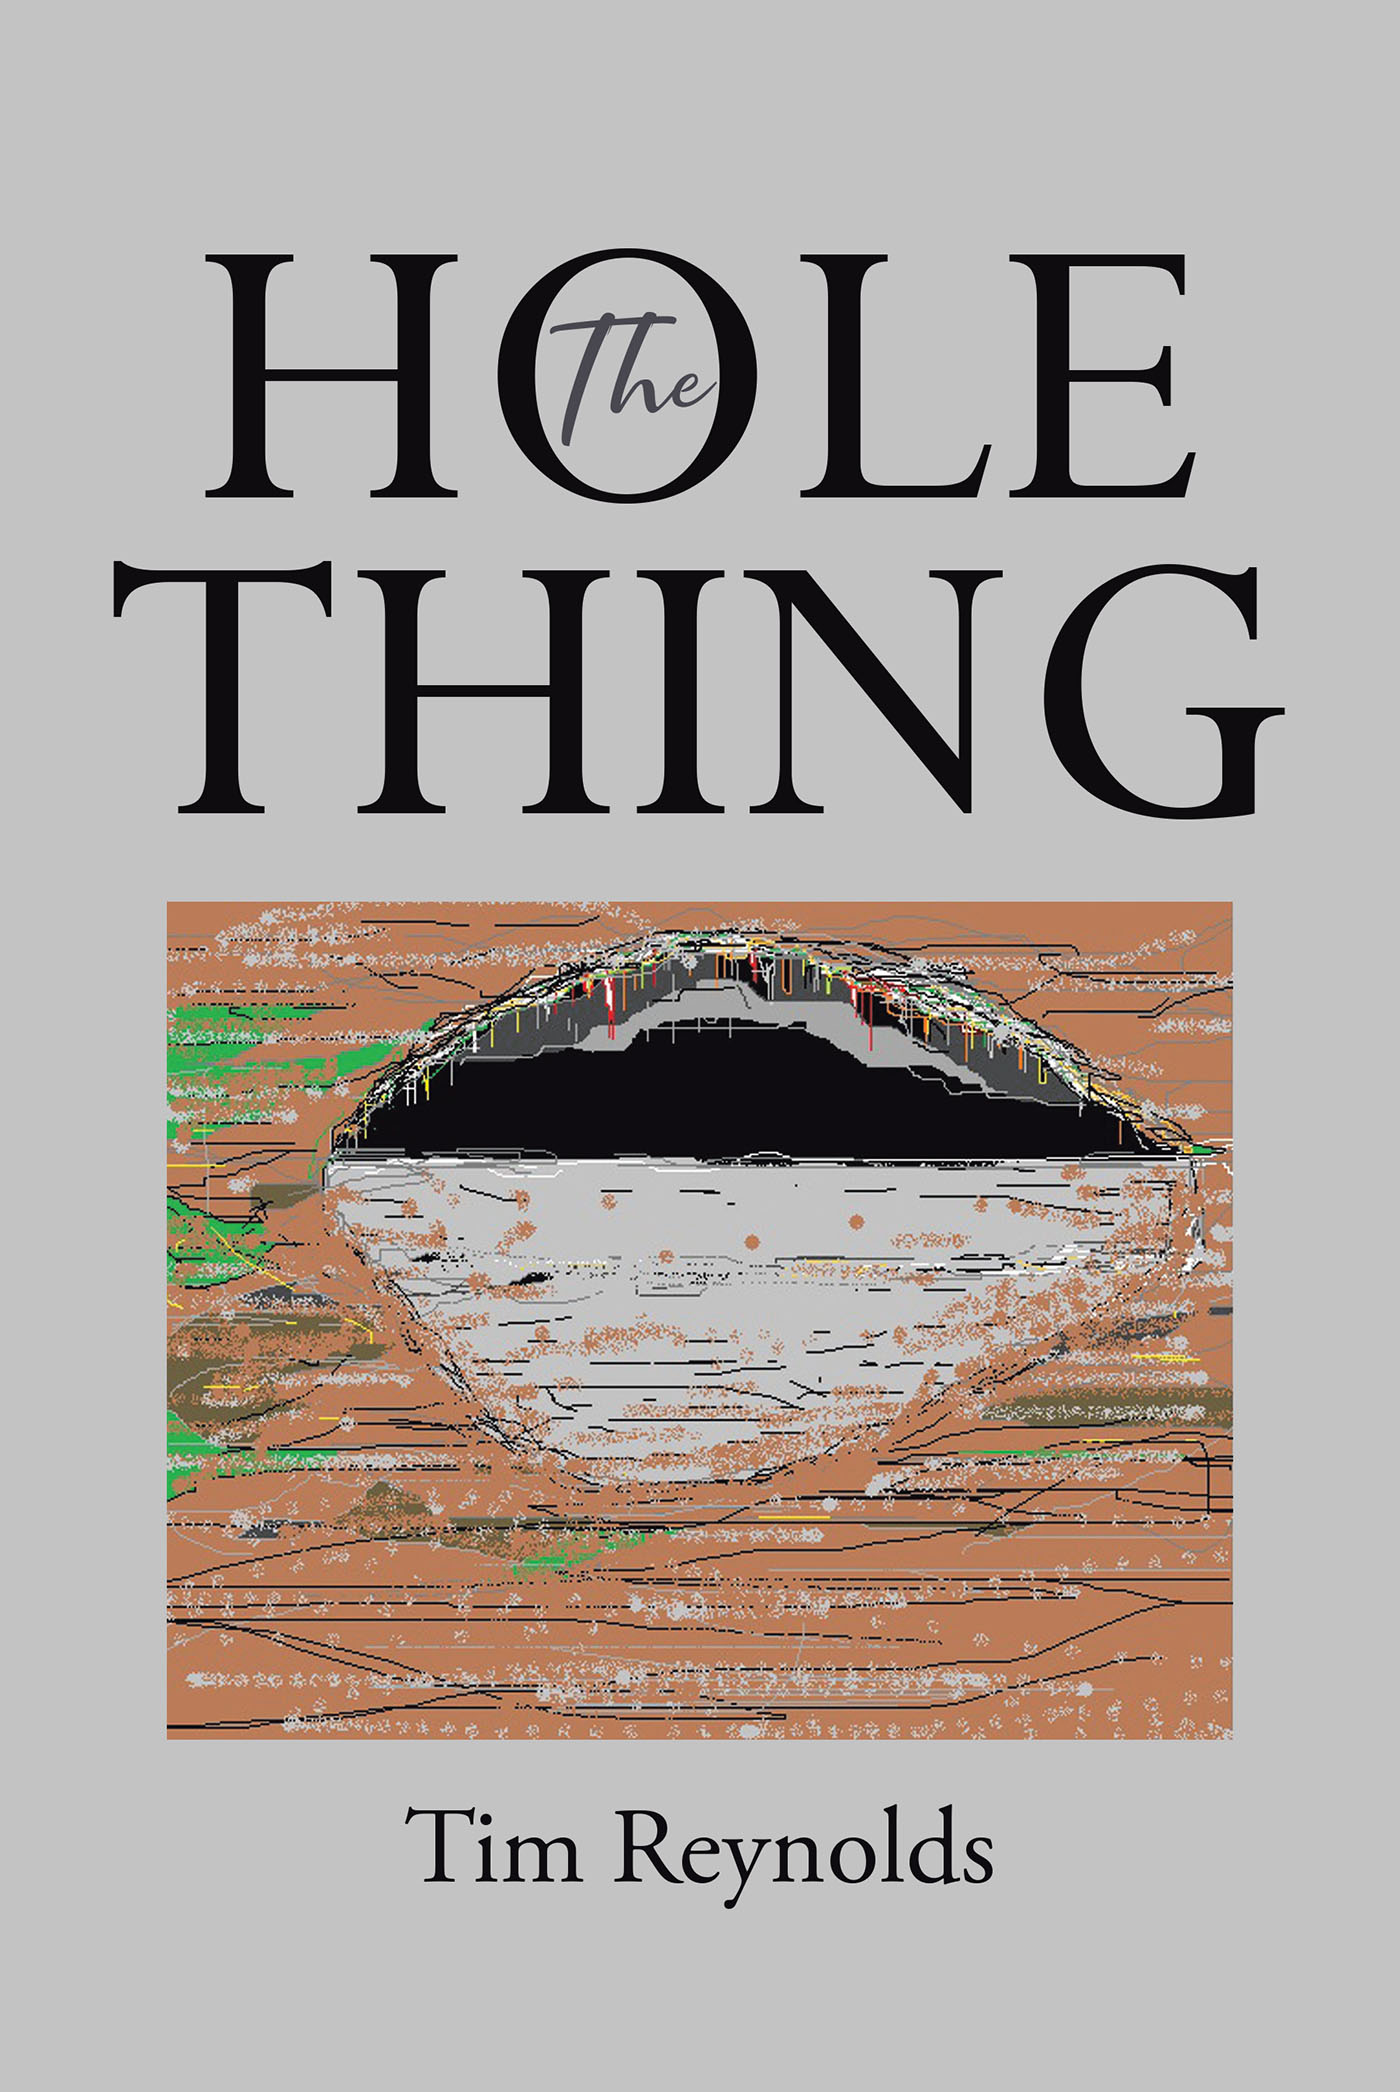 Author Tim Reynolds’s New Book, "The Hole Thing," is a Fascinating Tale That Continues the Story of a Scientist Who Has Dedicated His Life to Solving Humanity's Problems